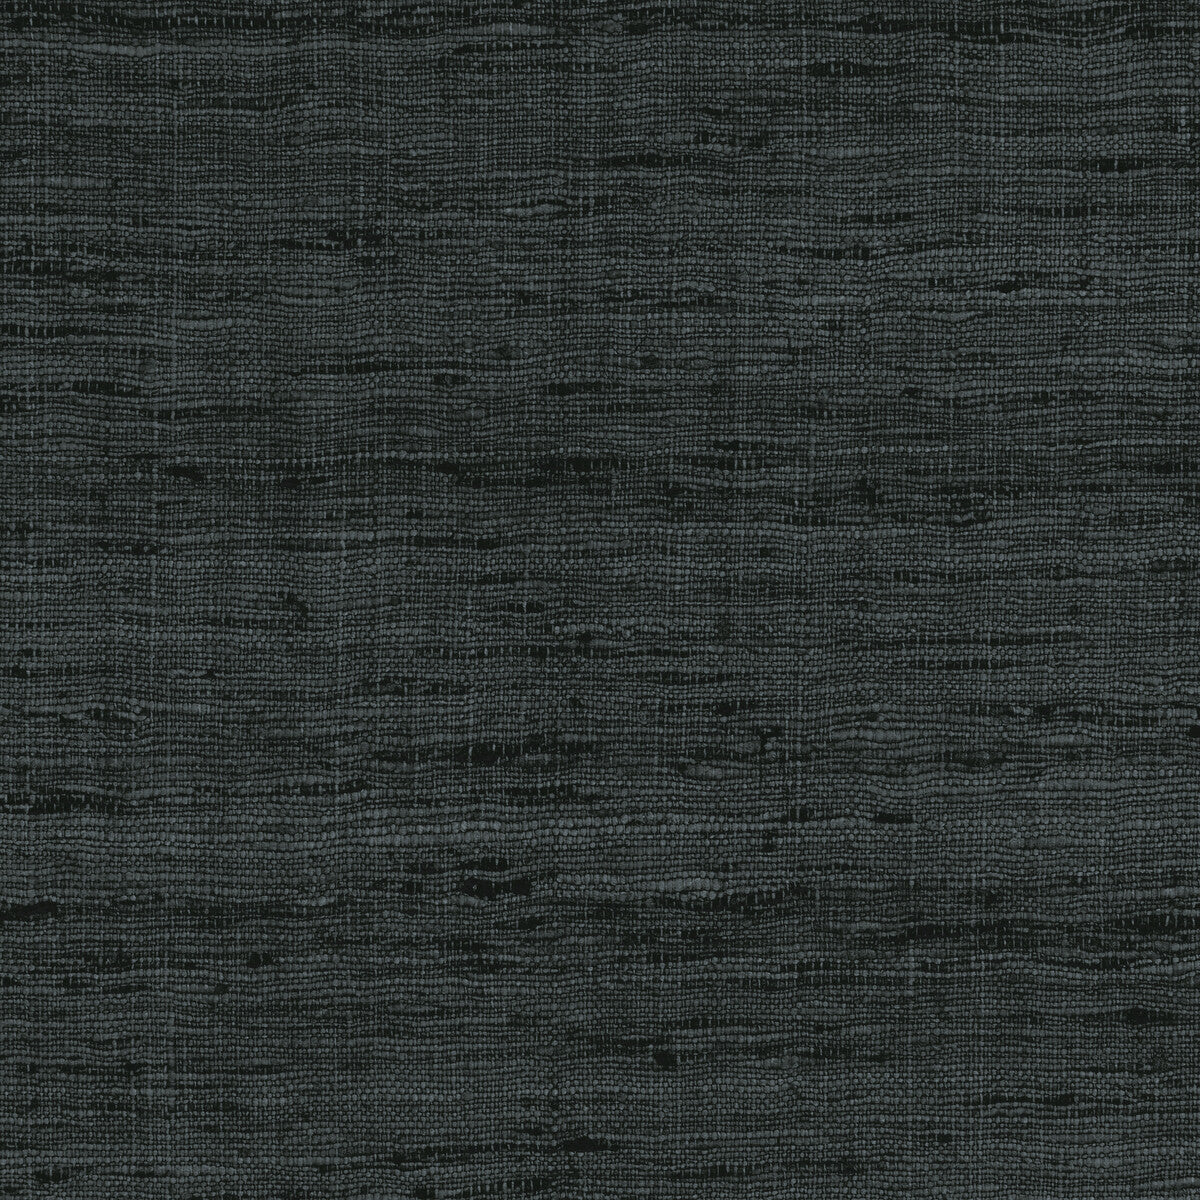 Sonoma fabric in tar color - pattern GWF-3109.821.0 - by Lee Jofa Modern in the Kelly Wearstler VI collection